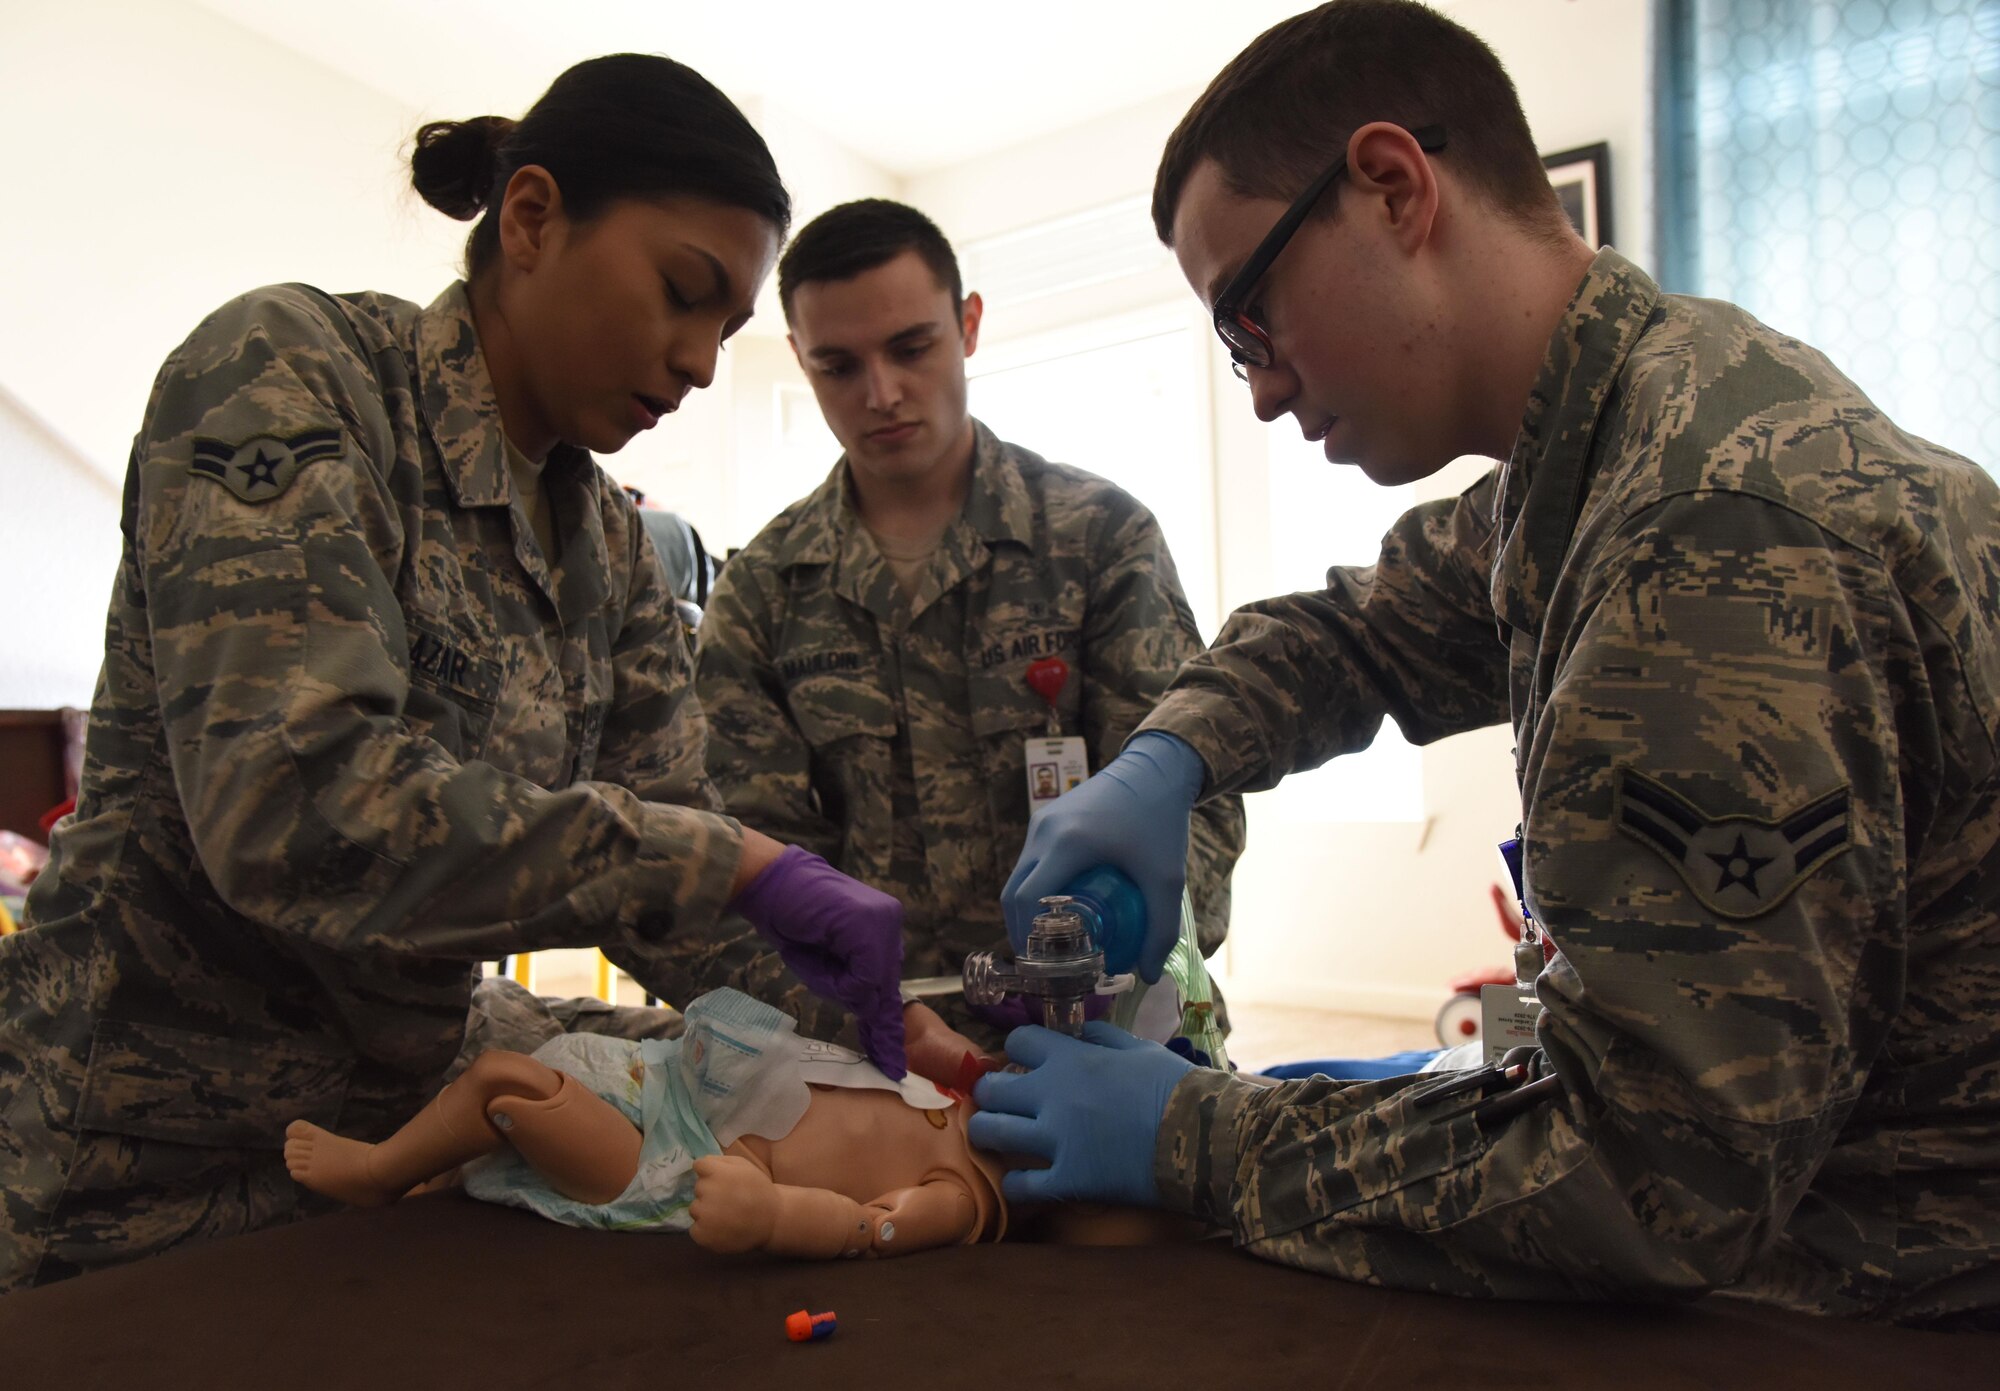 Airman 1st Class Jacqueline Salazar, Senior Airman Brock Mauldin and Airman 1st Class Andrew Frost, 81st Medical Operations Squadron medical technicians, treat an infant “patient” found unresponsive in East Falcon subdivision May 24, 2017, in Biloxi, Miss., as part of a medical emergency scenario. Emergency room staff members coordinated with the simulation lab to use human patient simulators for running various advanced cardiac life support scenarios to improve Keesler’s new medical technicians’ skills and get them familiar with emergency equipment. (U.S. Air Force photo by Kemberly Groue)